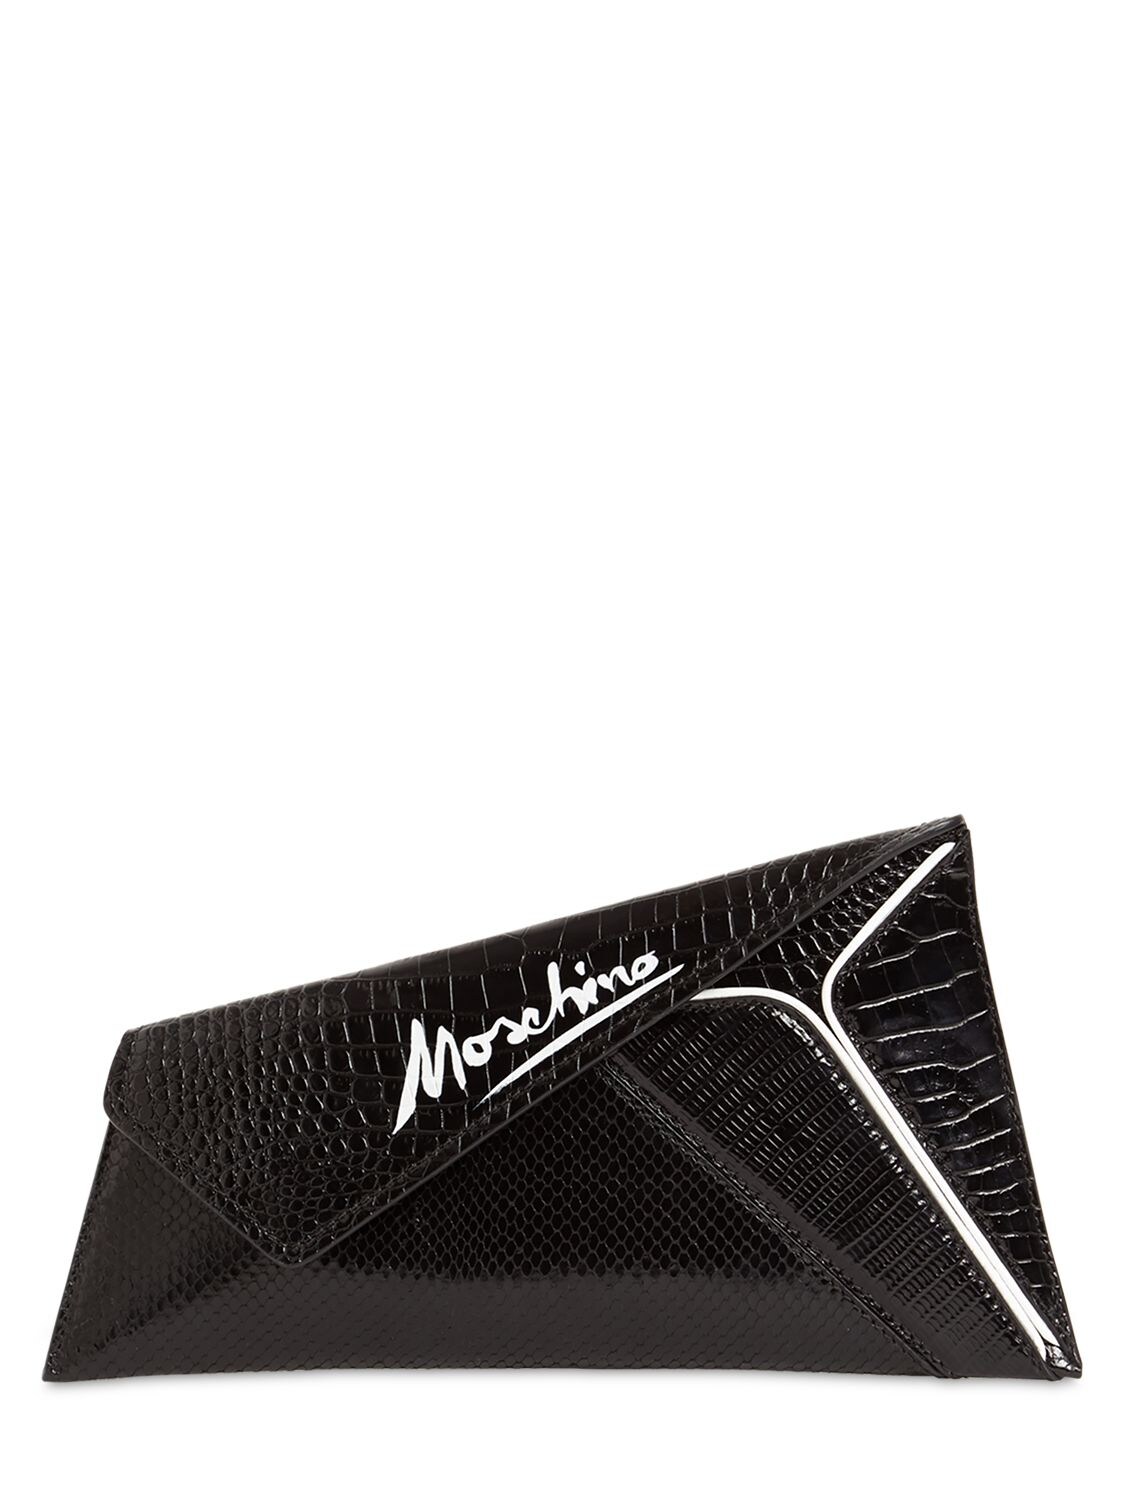 Moschino Printed Leather Clutch In Black